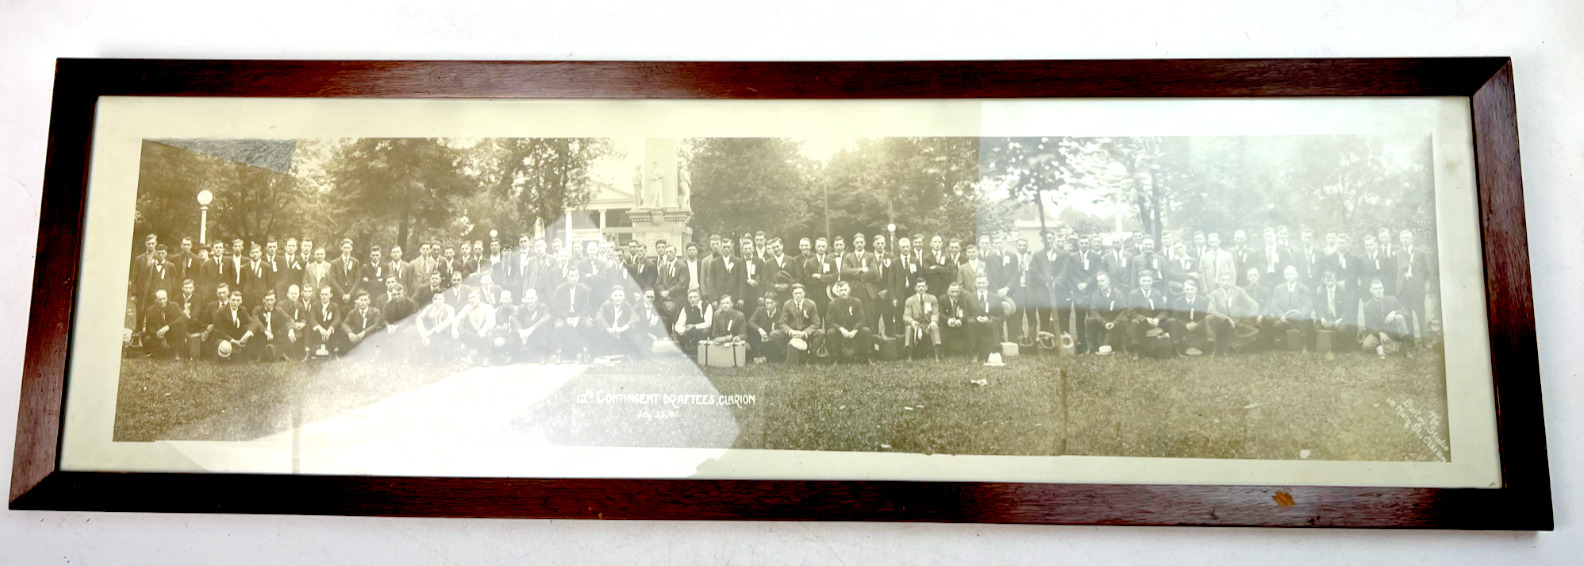 Vintage Panoramic Photo - 12th Contingent Draftees, Clarion